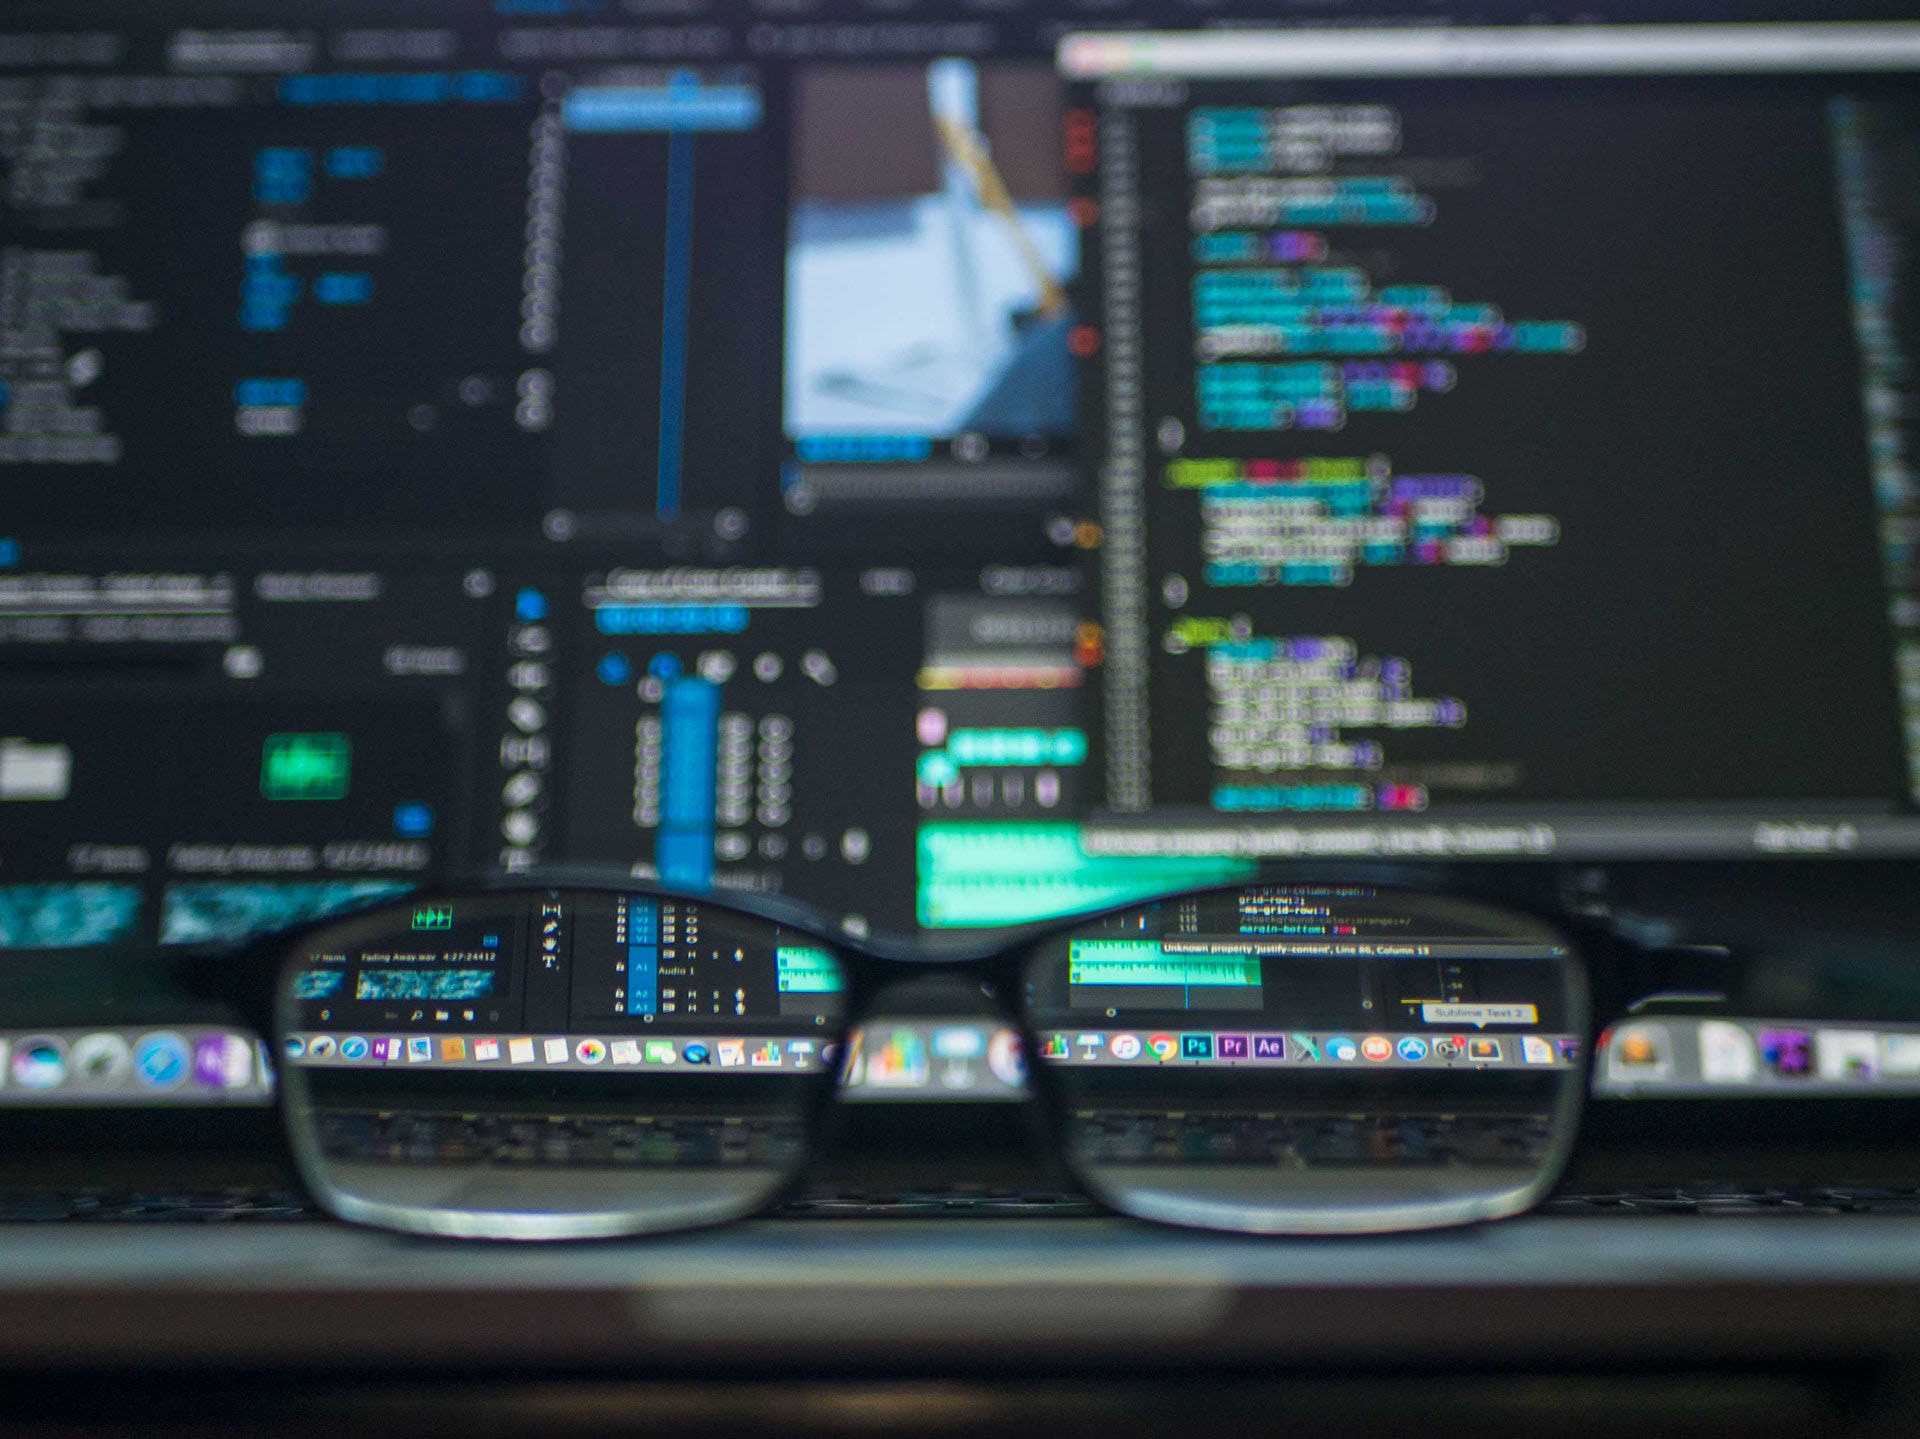 A pair of black glasses sits in front of a computer screen with lots of data on the screen. photo courtesy of pexels.